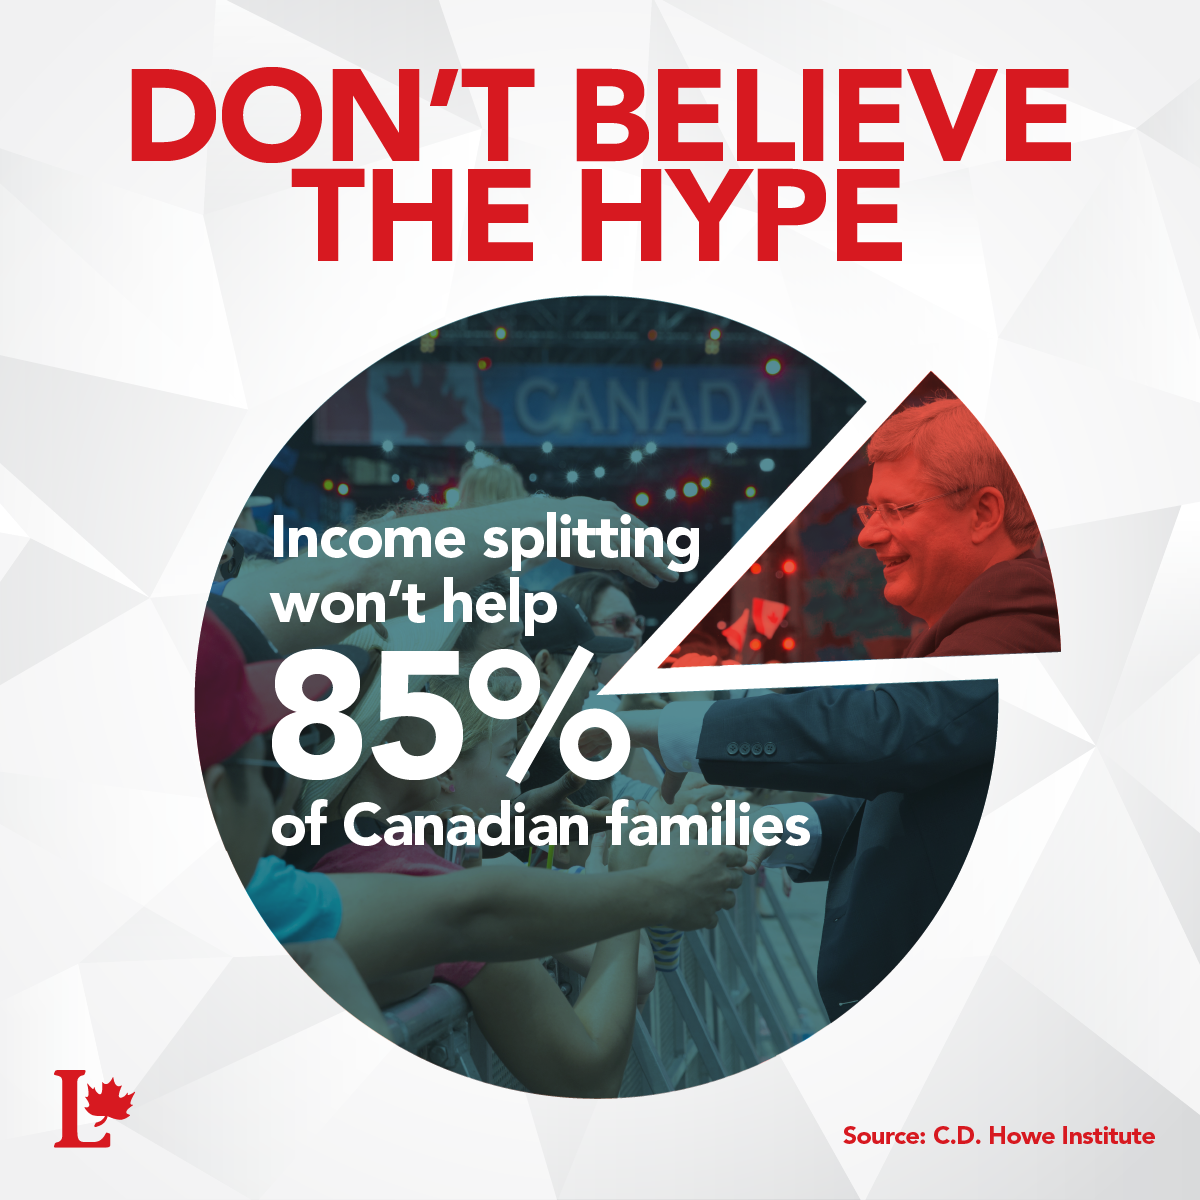 Don't believe the hype. Income splitting won't help 85% of Canadian families.